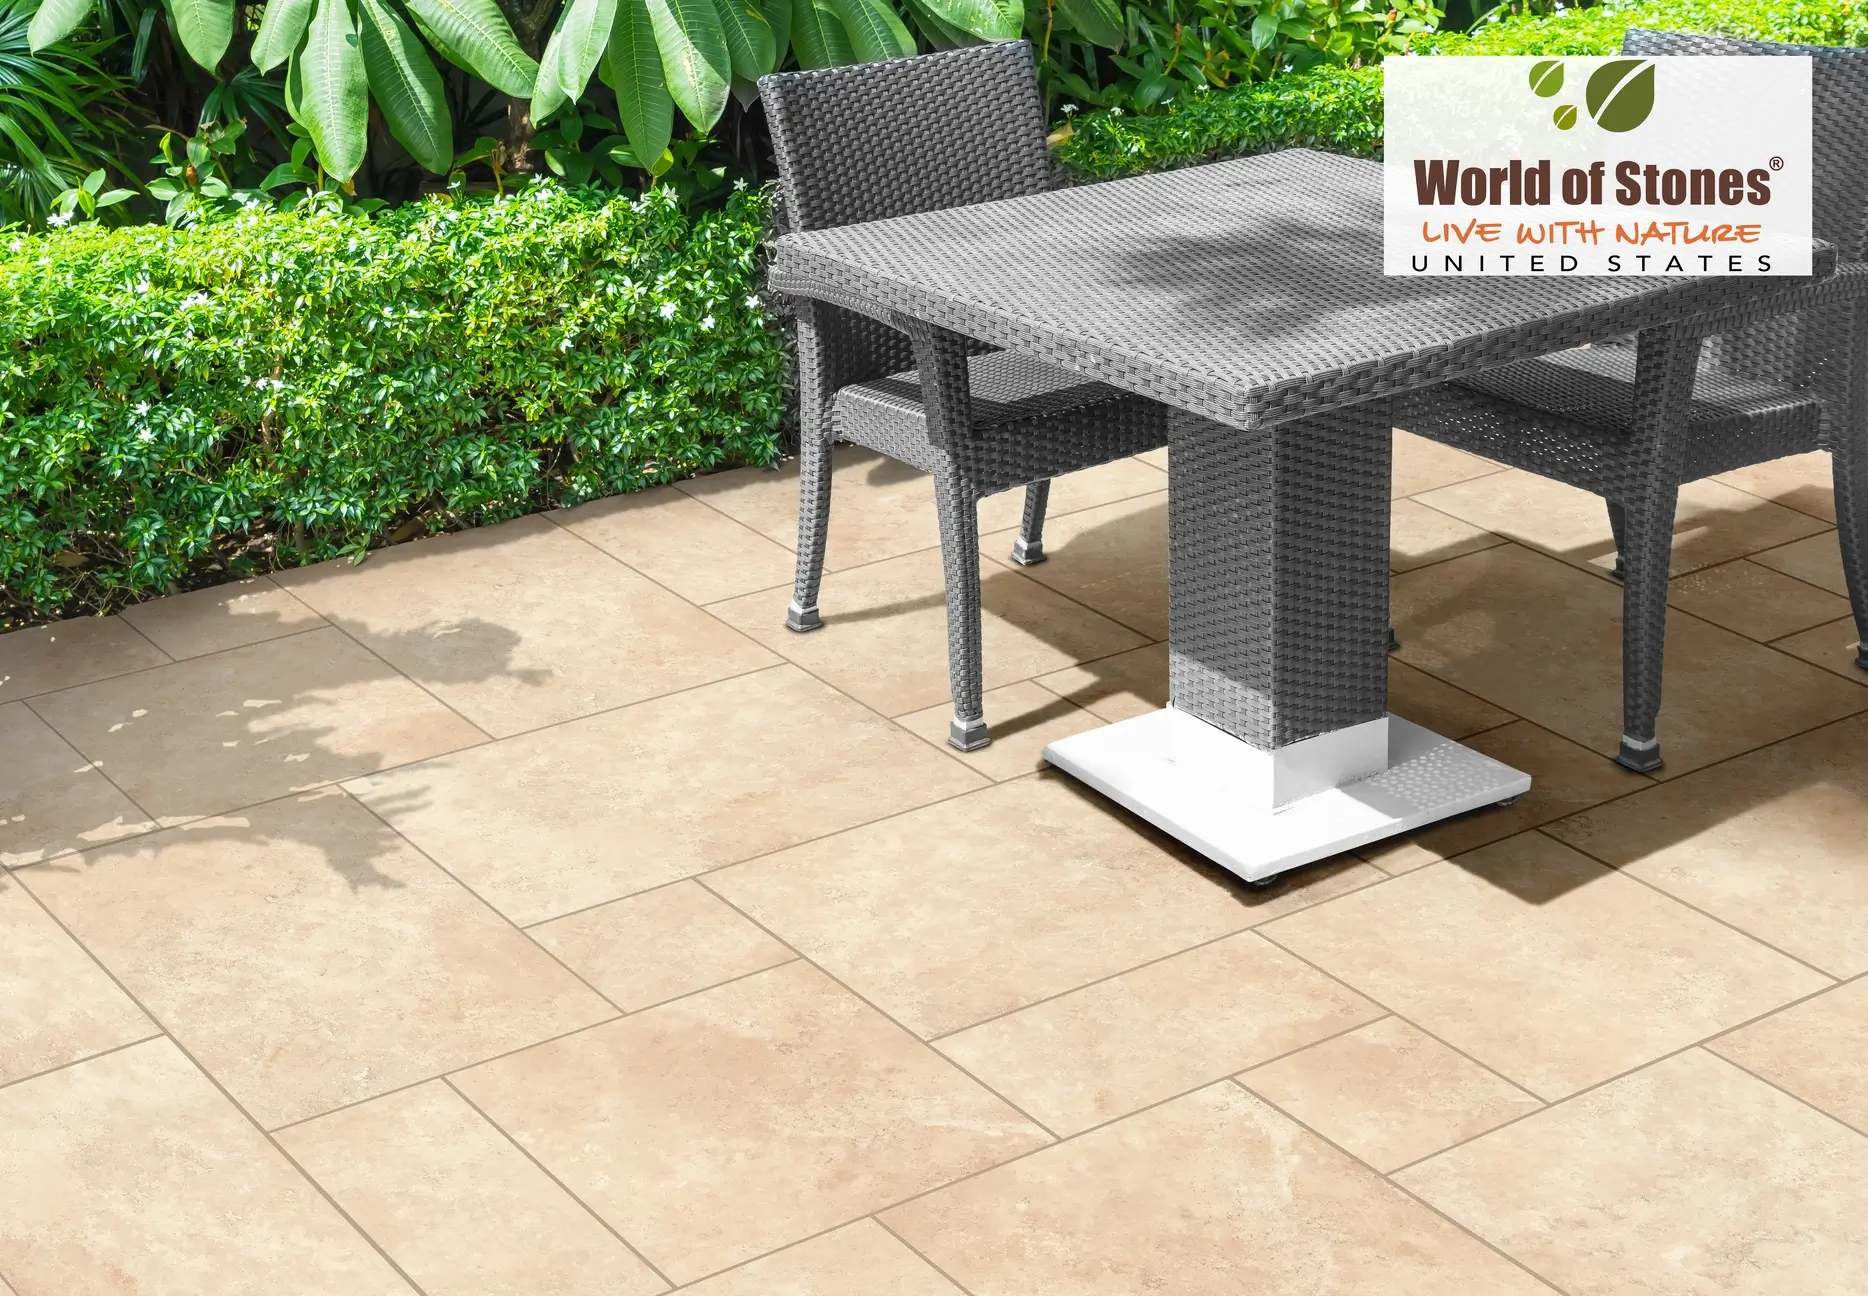 Ceramic Vs Porcelain Tiles: Which Tile Is Best for Your Home